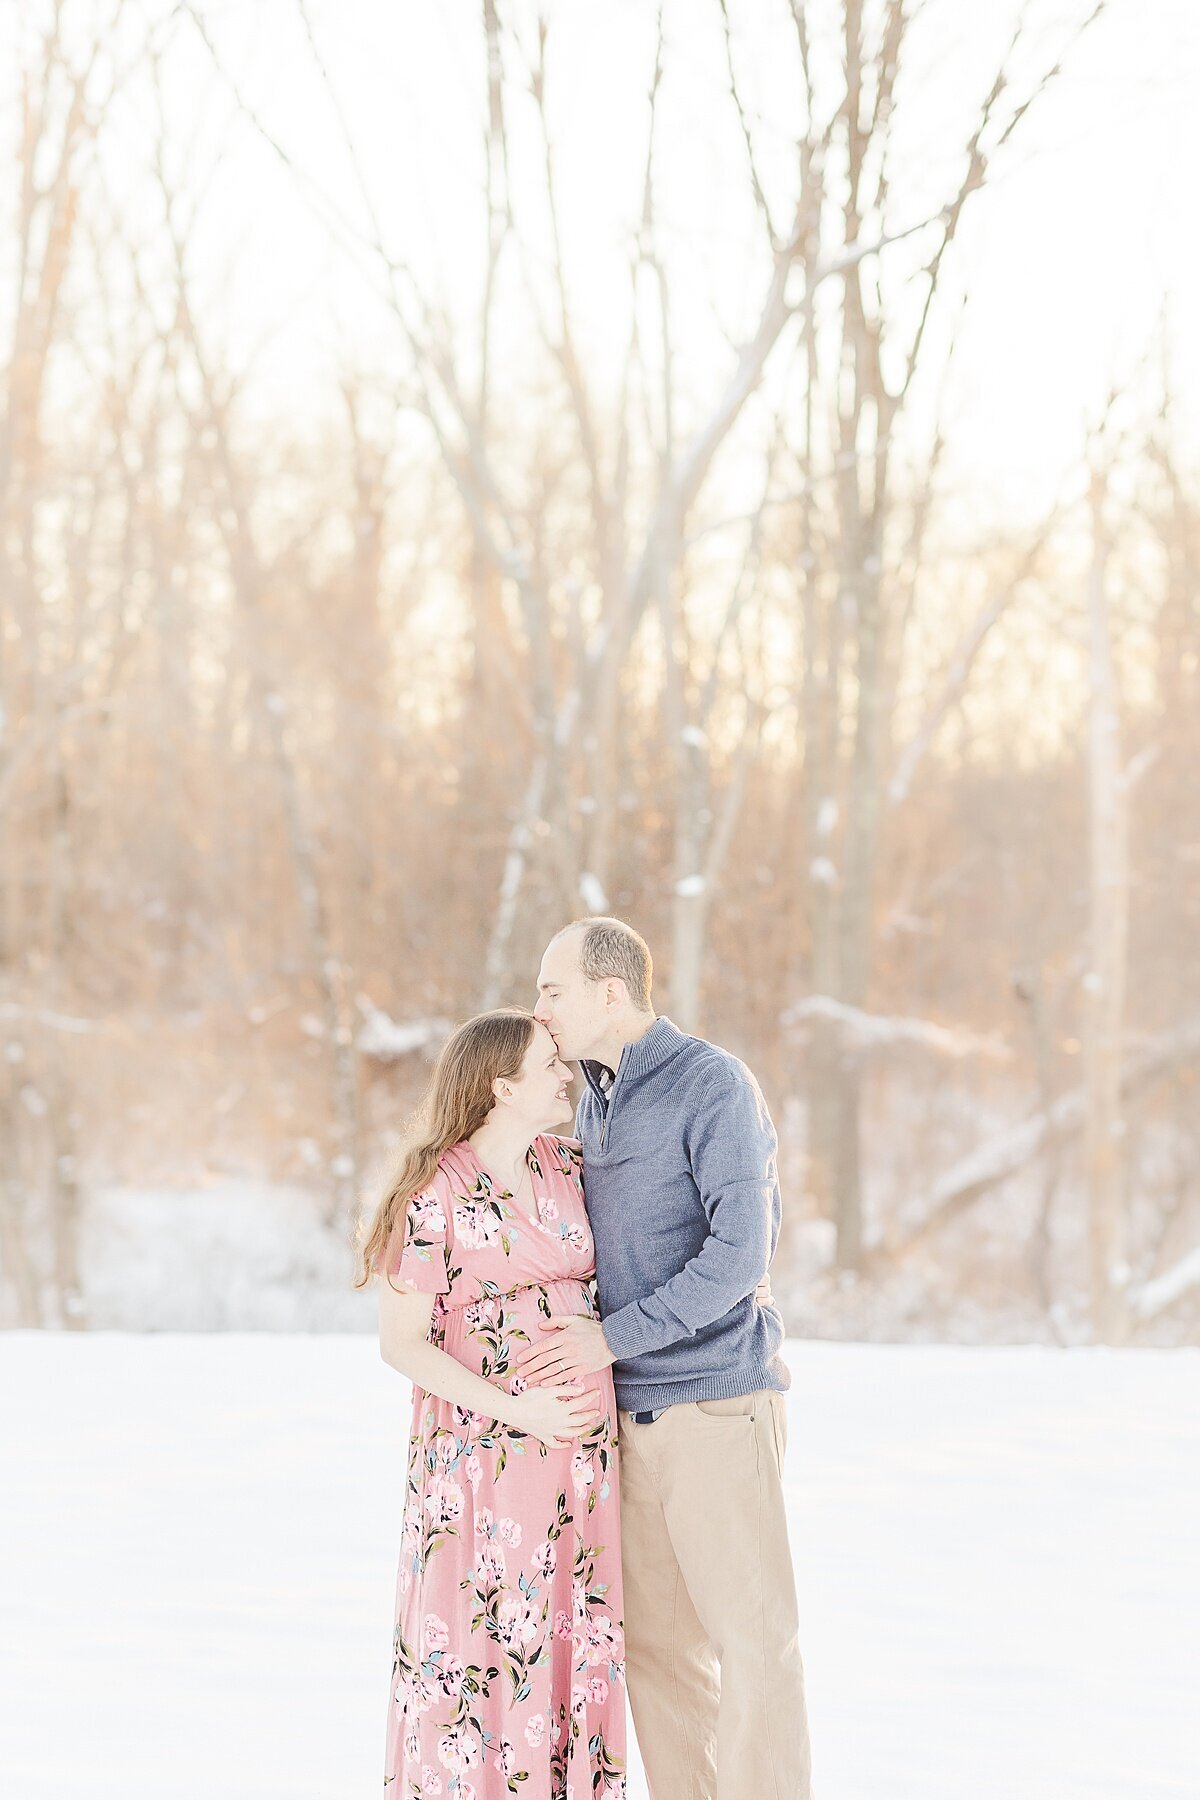 couple kisses during snowy winter maternity photo session with Sara Sniderman Photography in Medfield Massachusetts